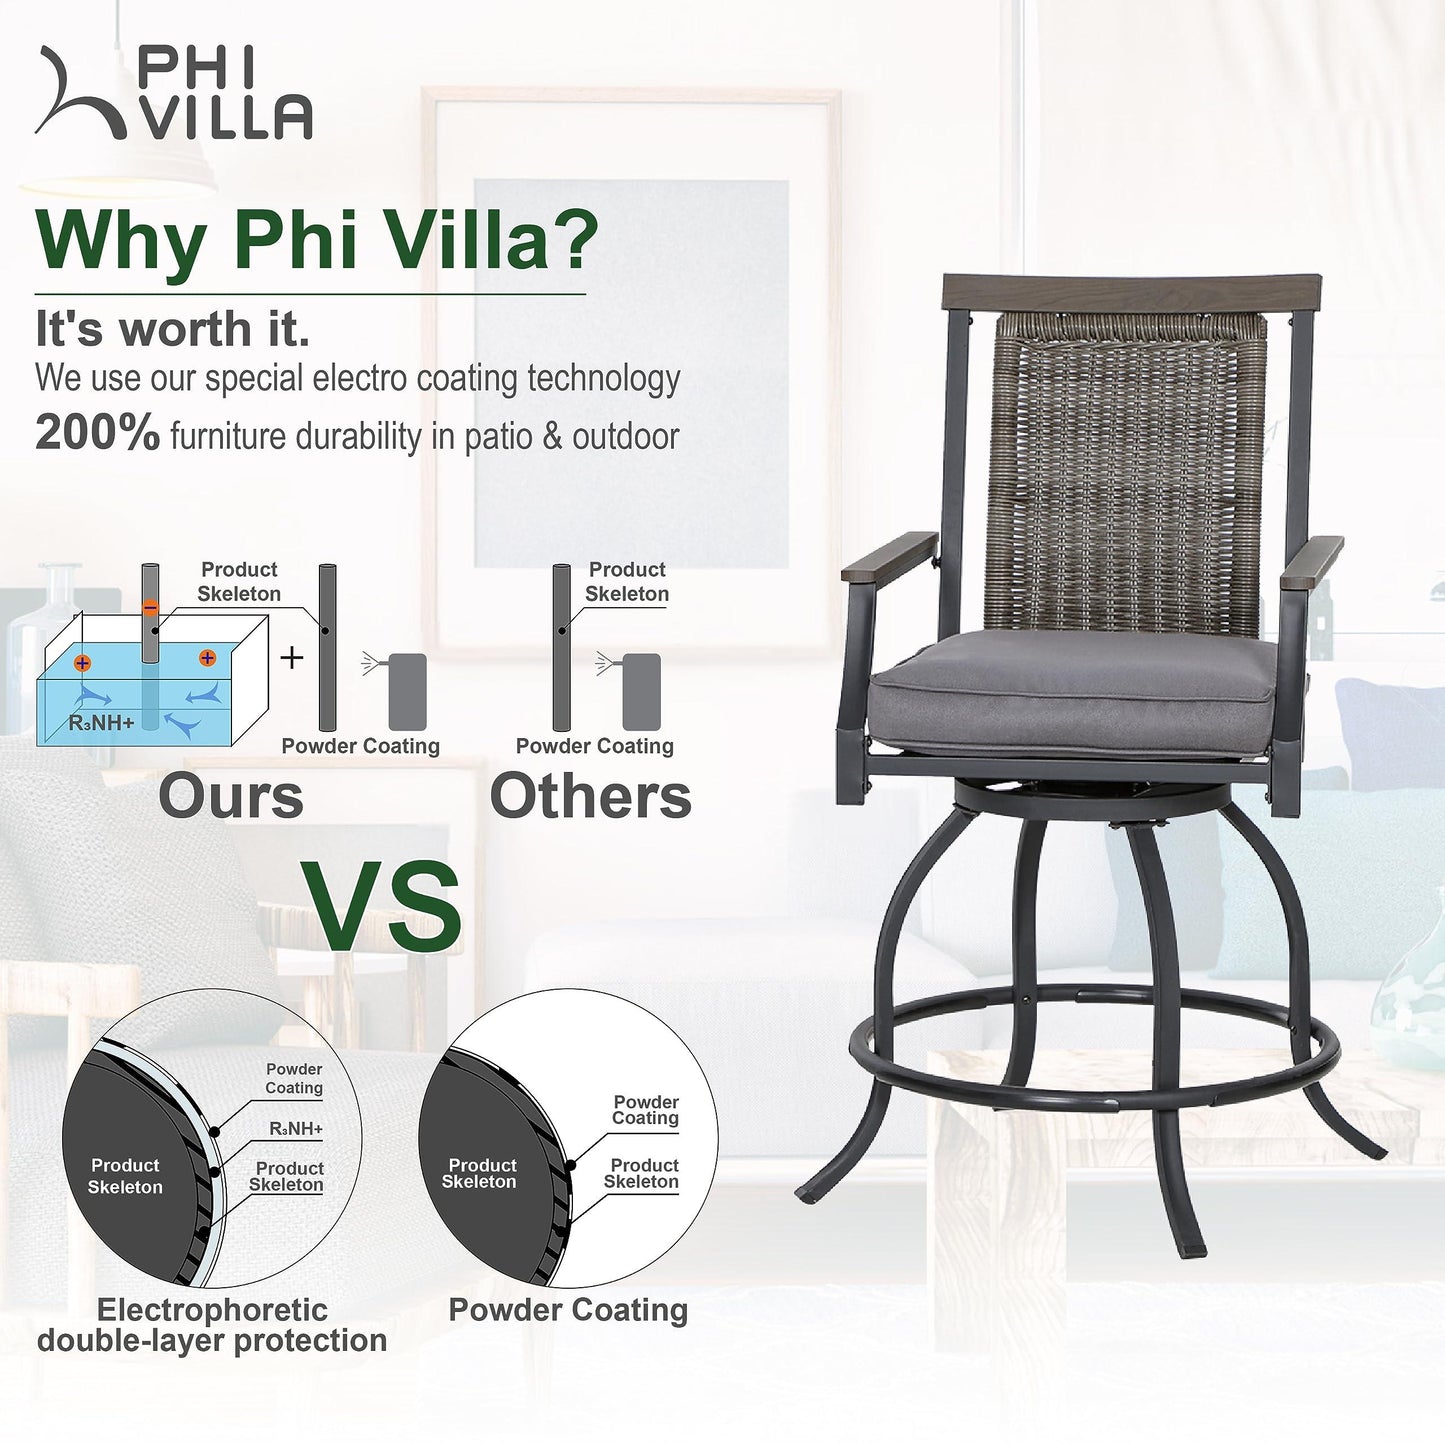 PHI VILLA Outdoor Swivel Bar Stools (24" Seat Height) with Rattan Backrest and Wood-Like Armrest Set of 2, Counter Height Patio Chair with 3.5" Padded Grey Cushion,All Weather for Garden,Yard,Lawn - CookCave